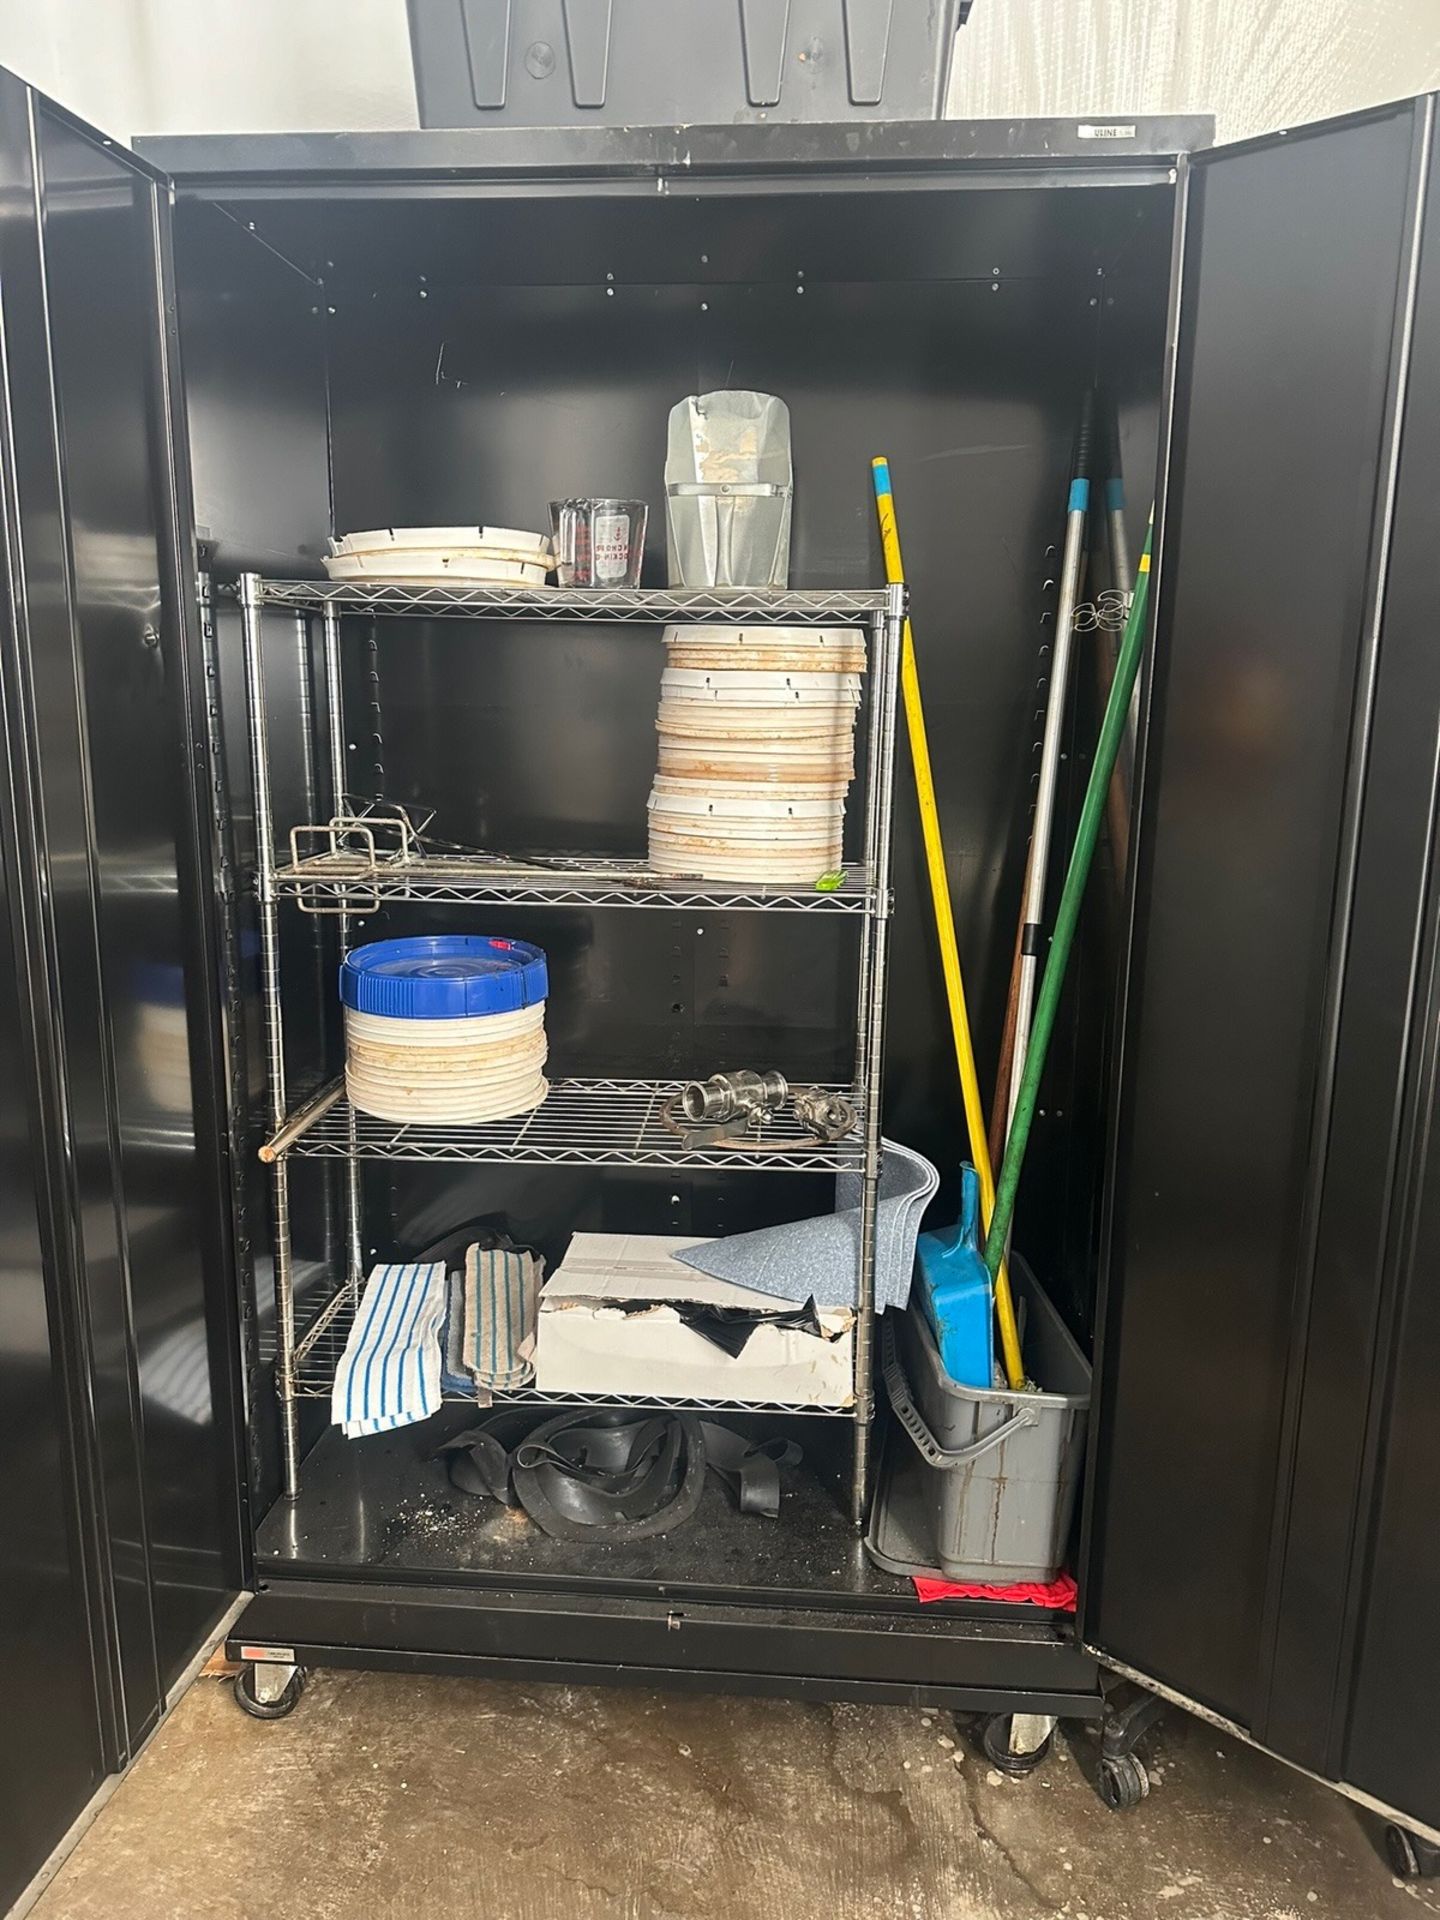 2 Door Metal Cabinet With Casters, With Contents | Rig Fee $50 - Image 2 of 2